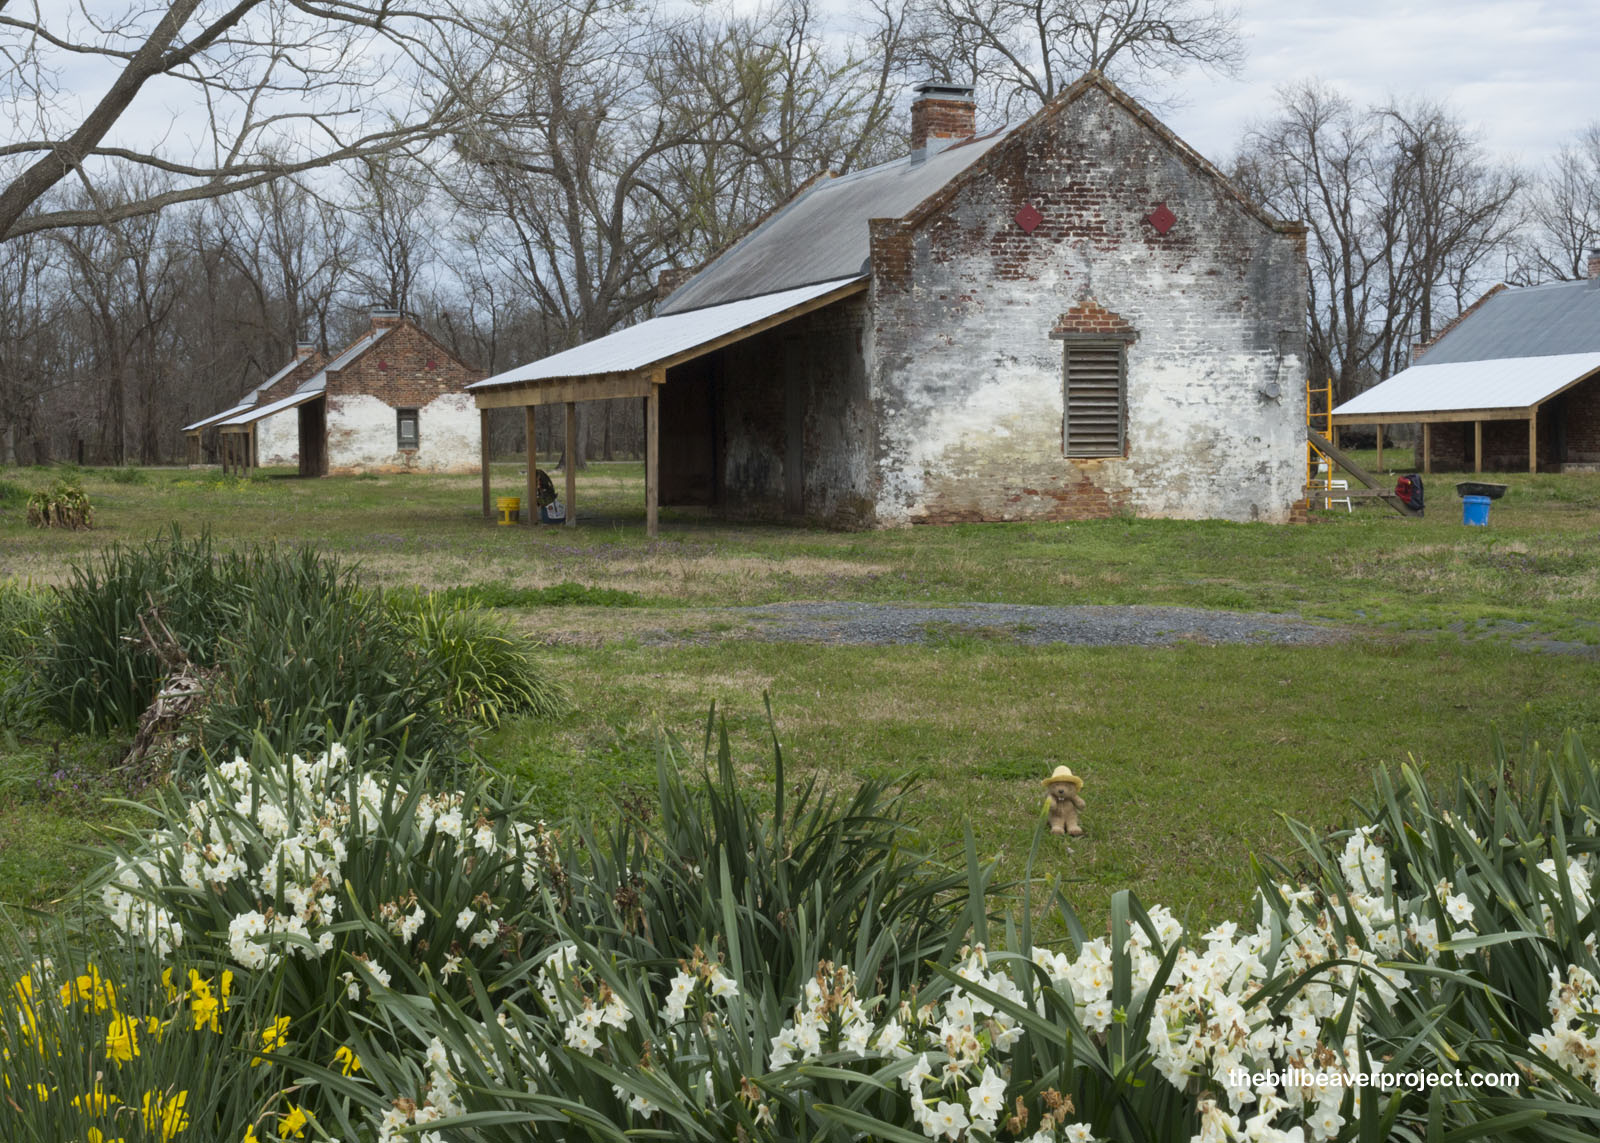 The houses where enslaved people lived!